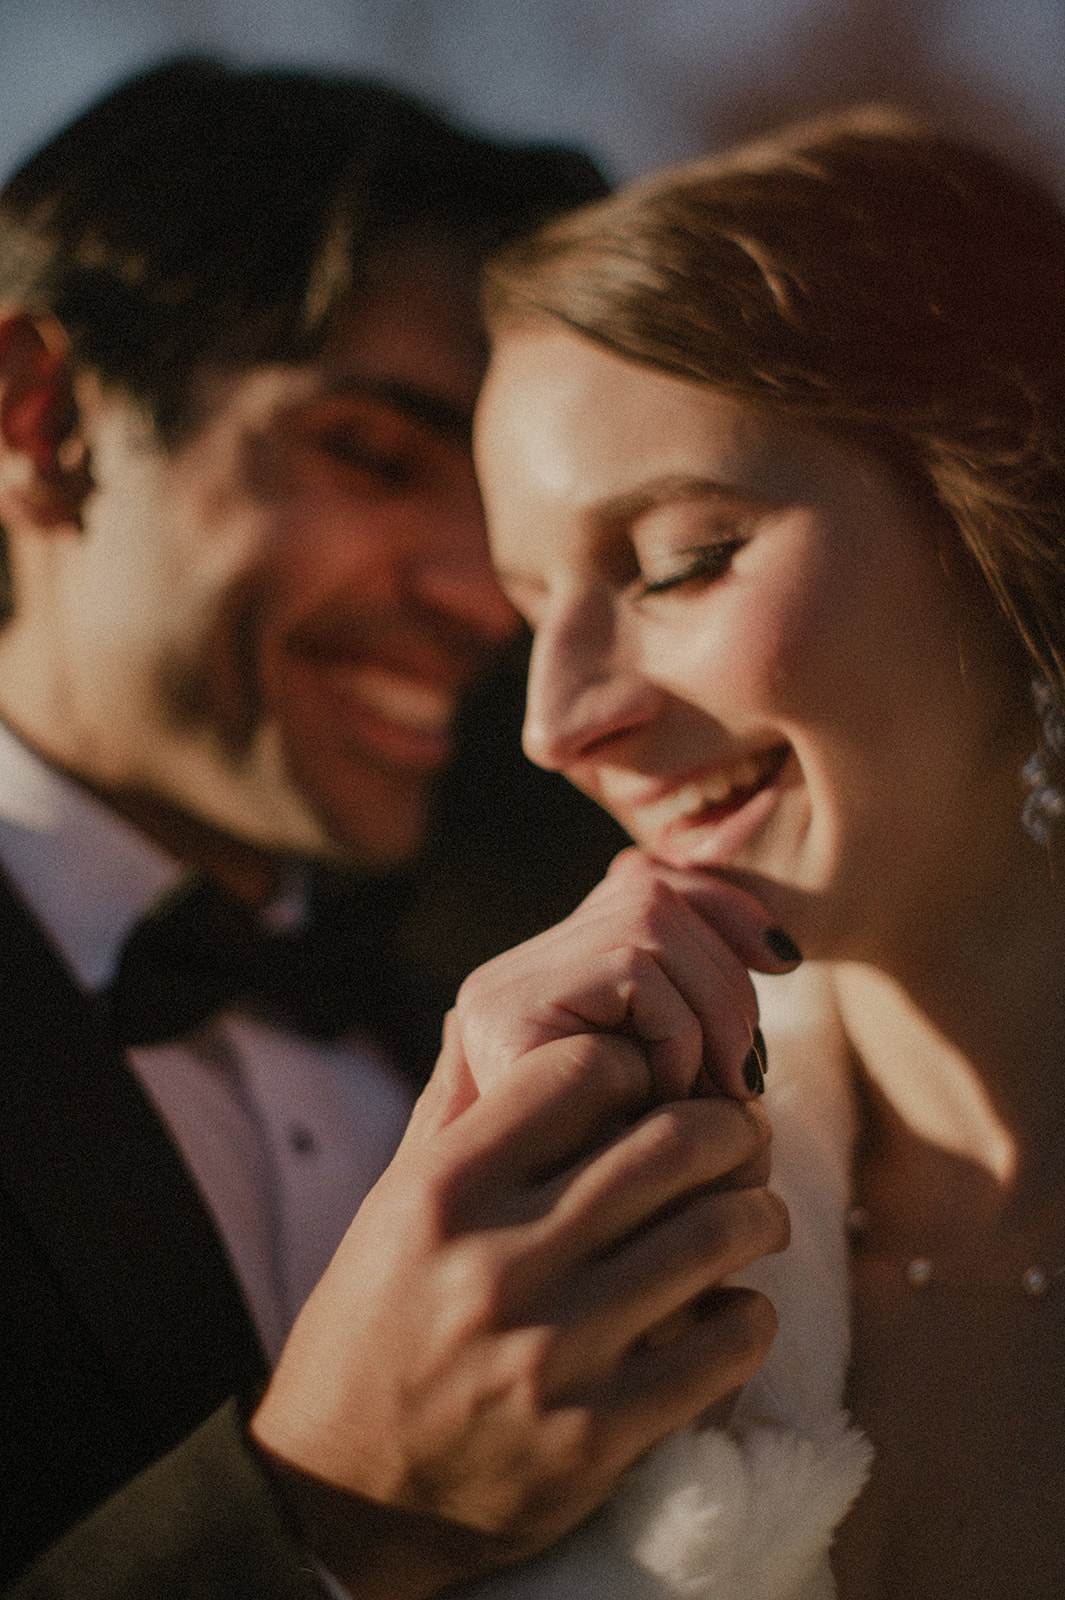 intimate closeup portrait of bride and groom laughing together in sunlight